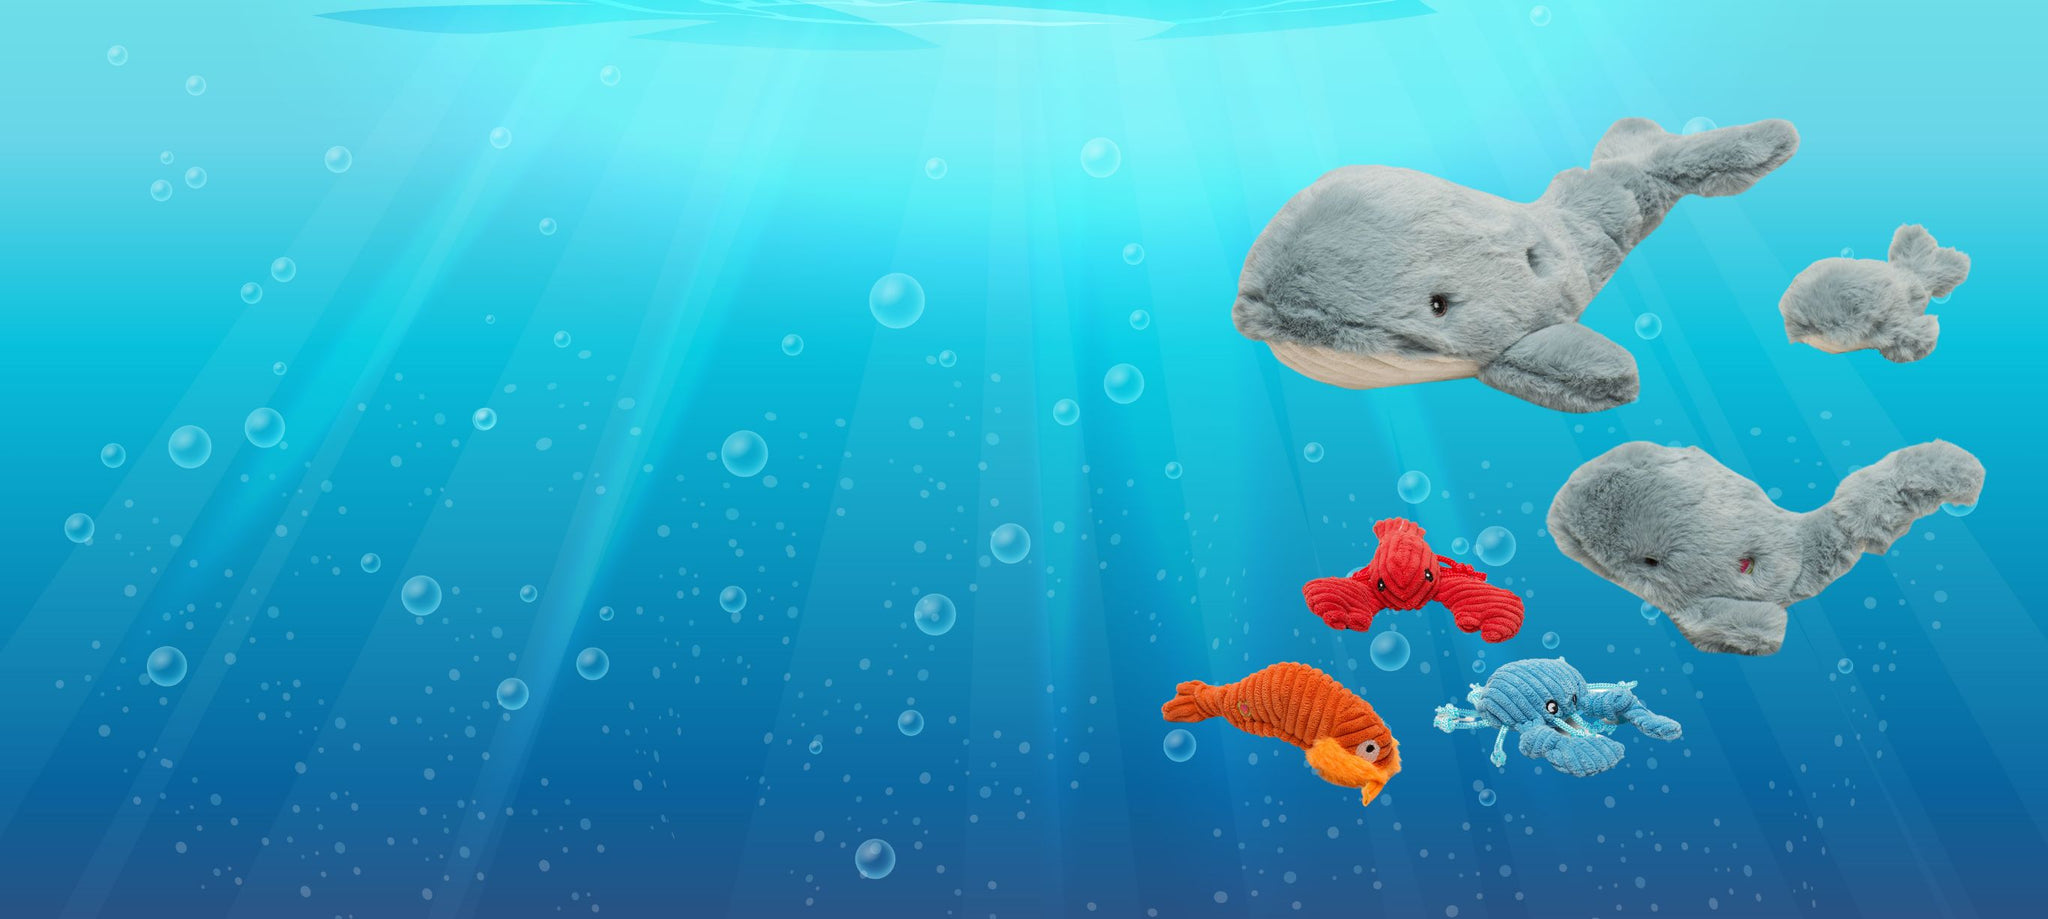 Background banner for the sea creature toys HuggleGroup has for sale